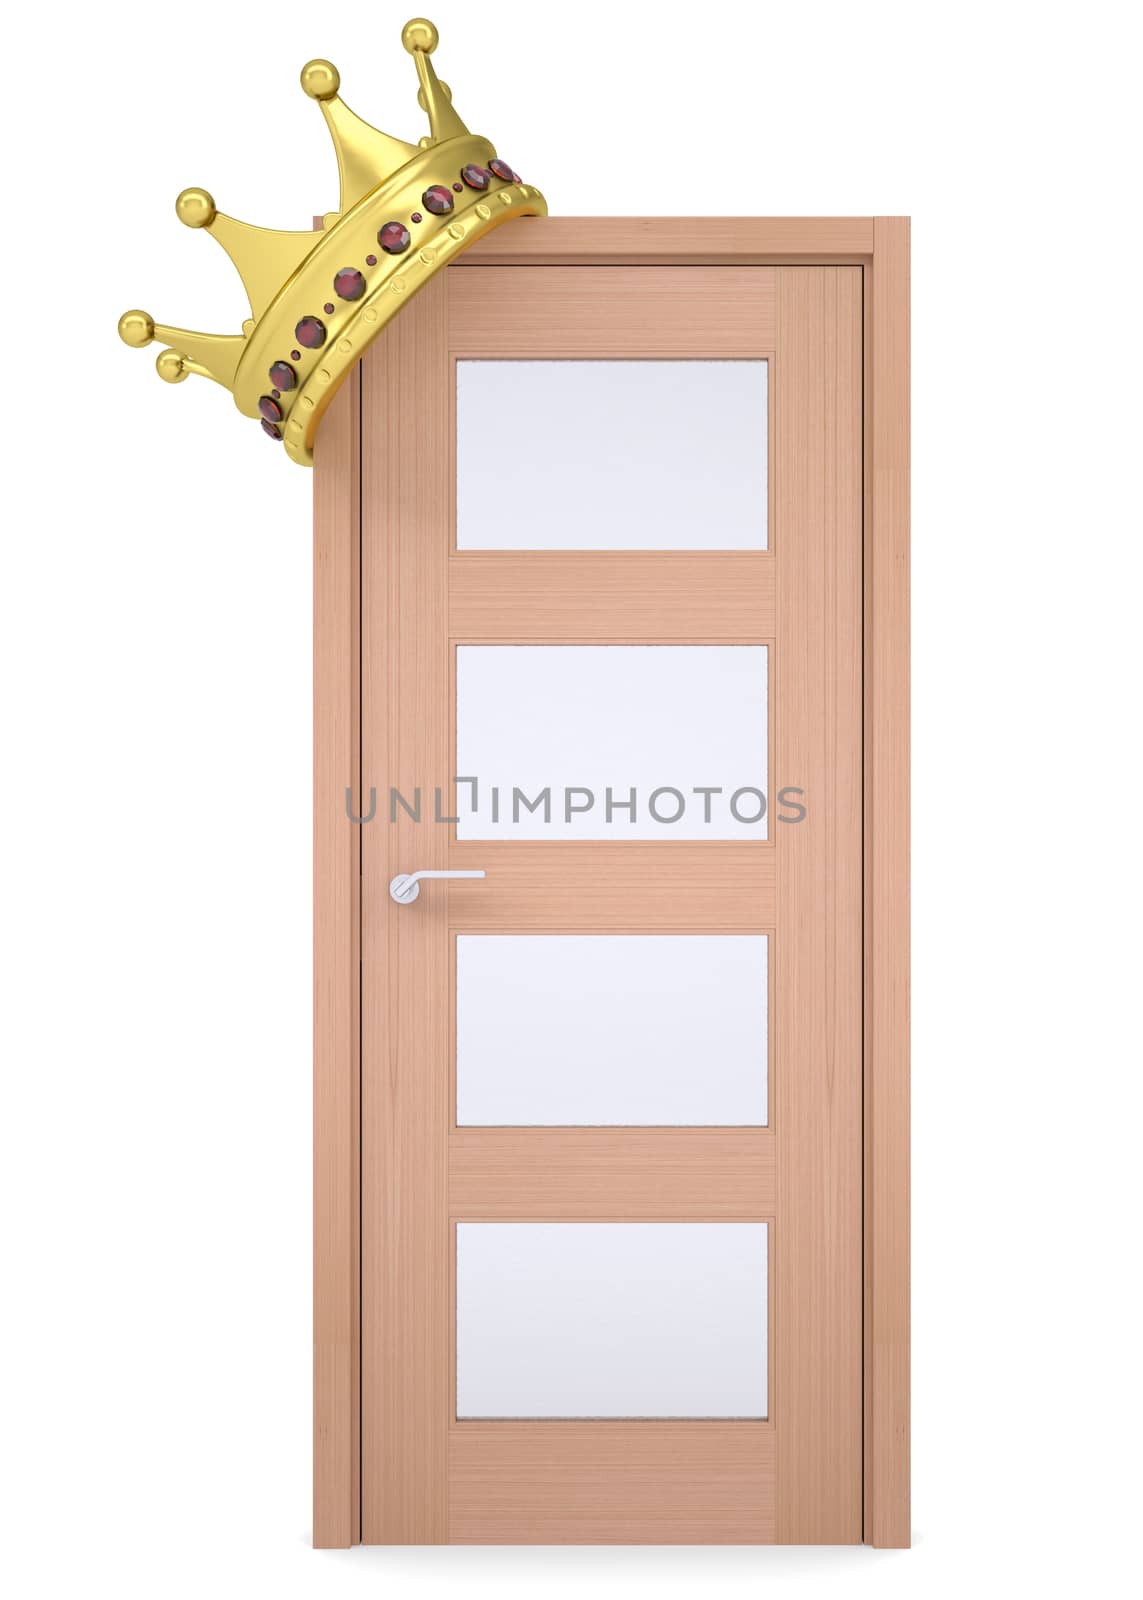 Gold crown on a wooden door by cherezoff